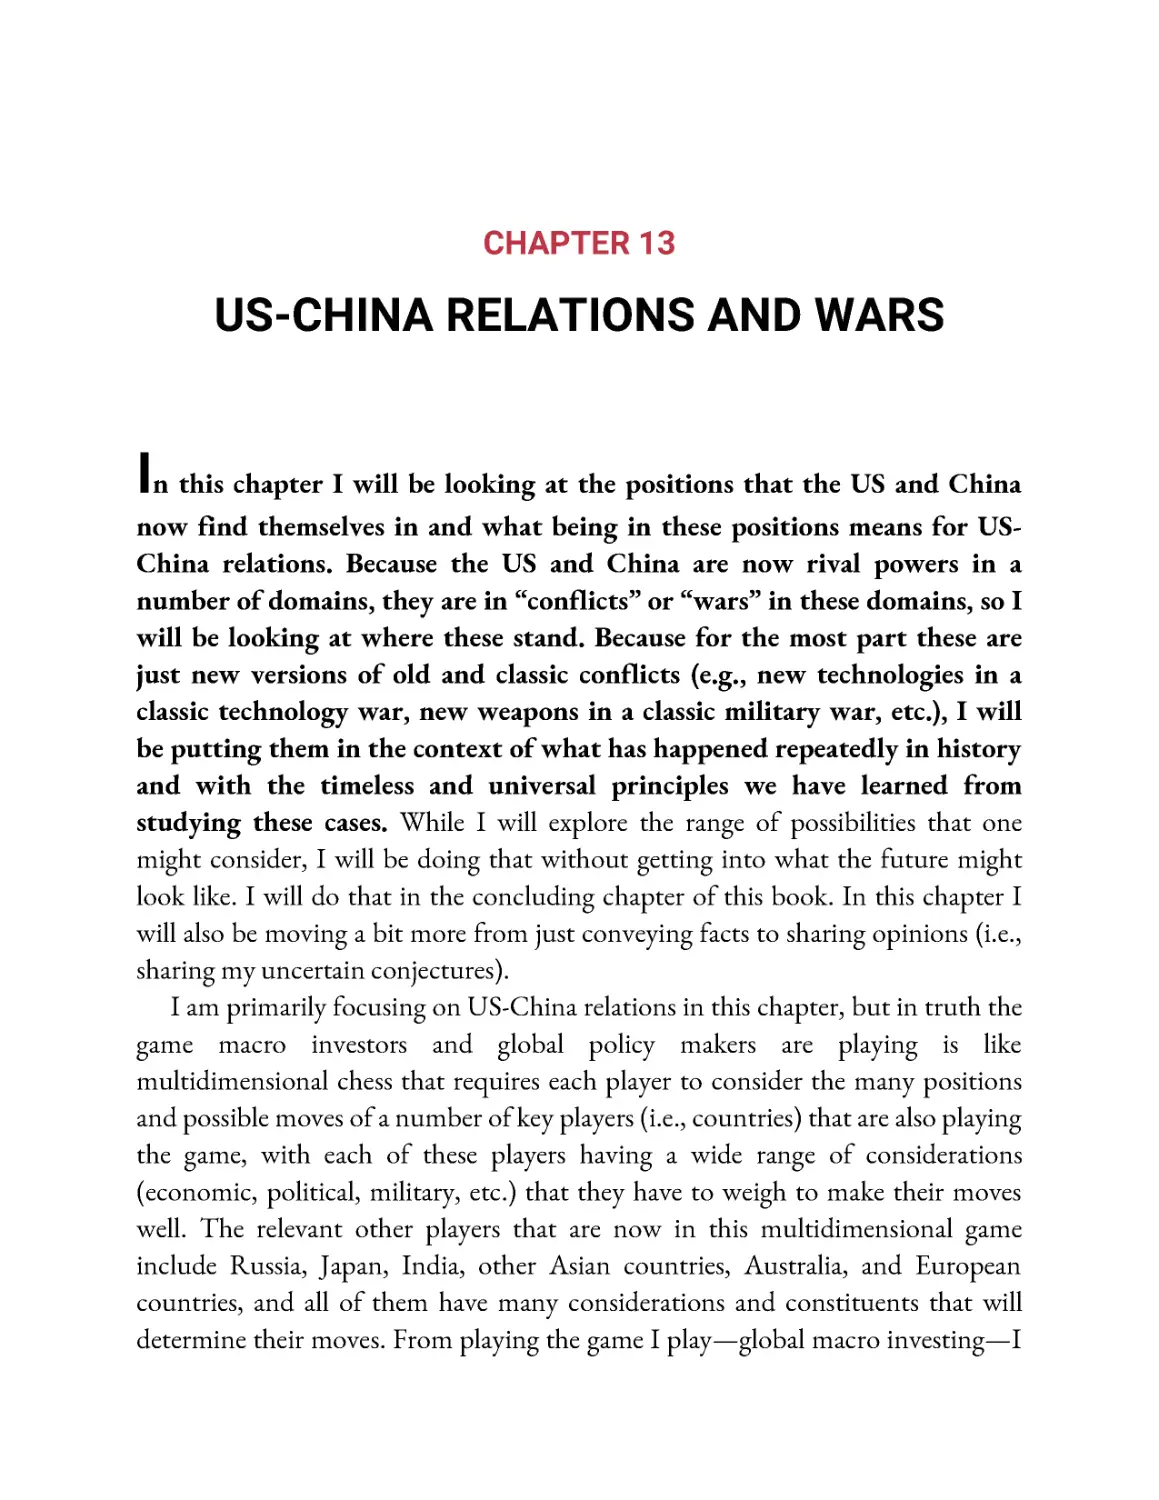 ﻿Chapter 13: US-China Relations and War